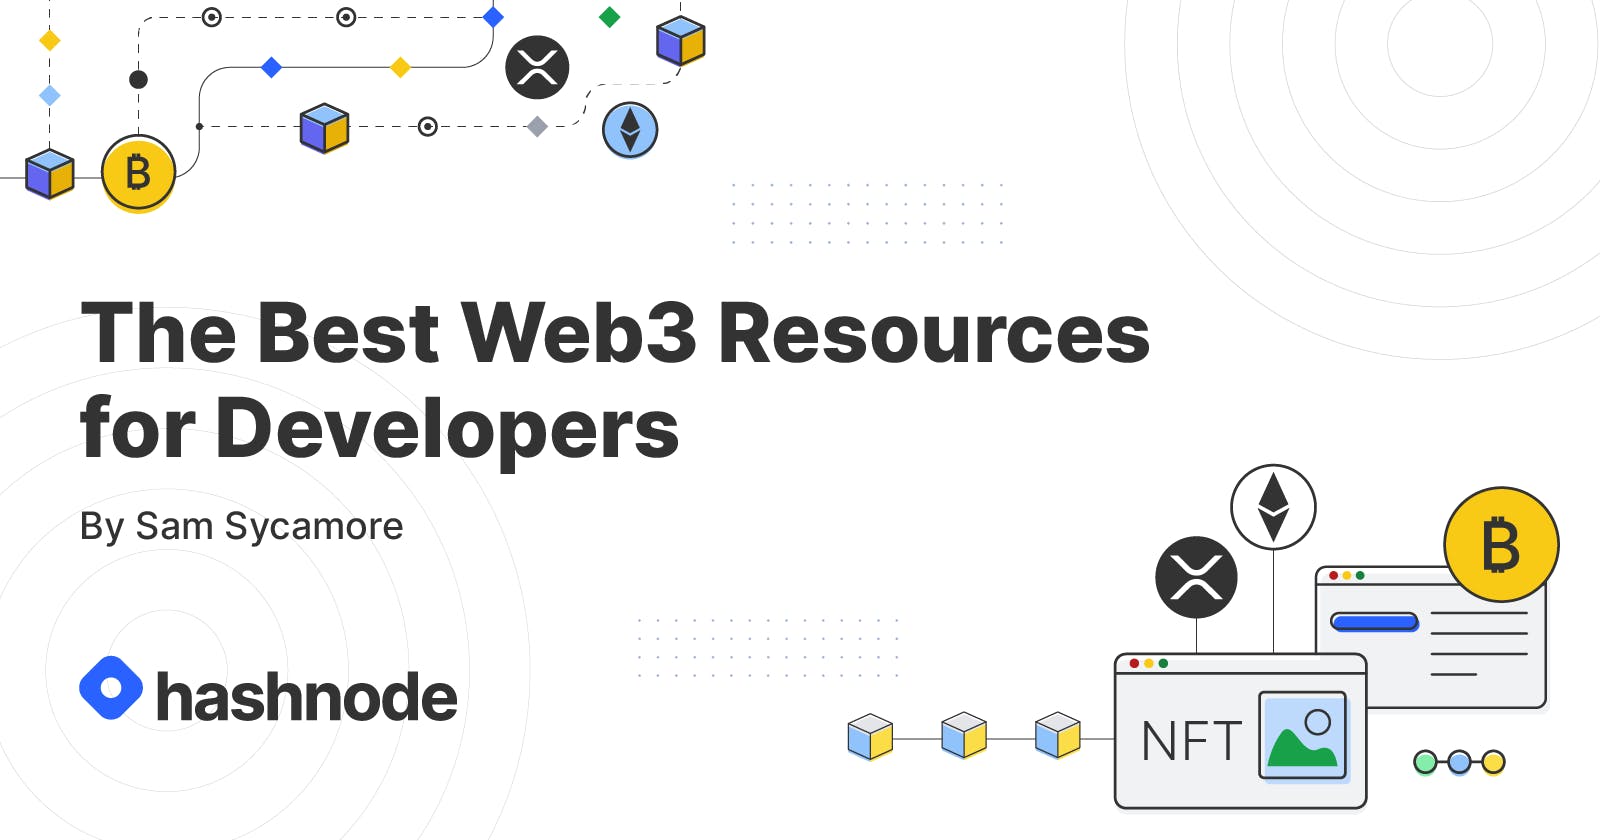 The Best Web3 Resources—Blockchain, Cryptocurrency, NFTs, DAOs, and the Metaverse